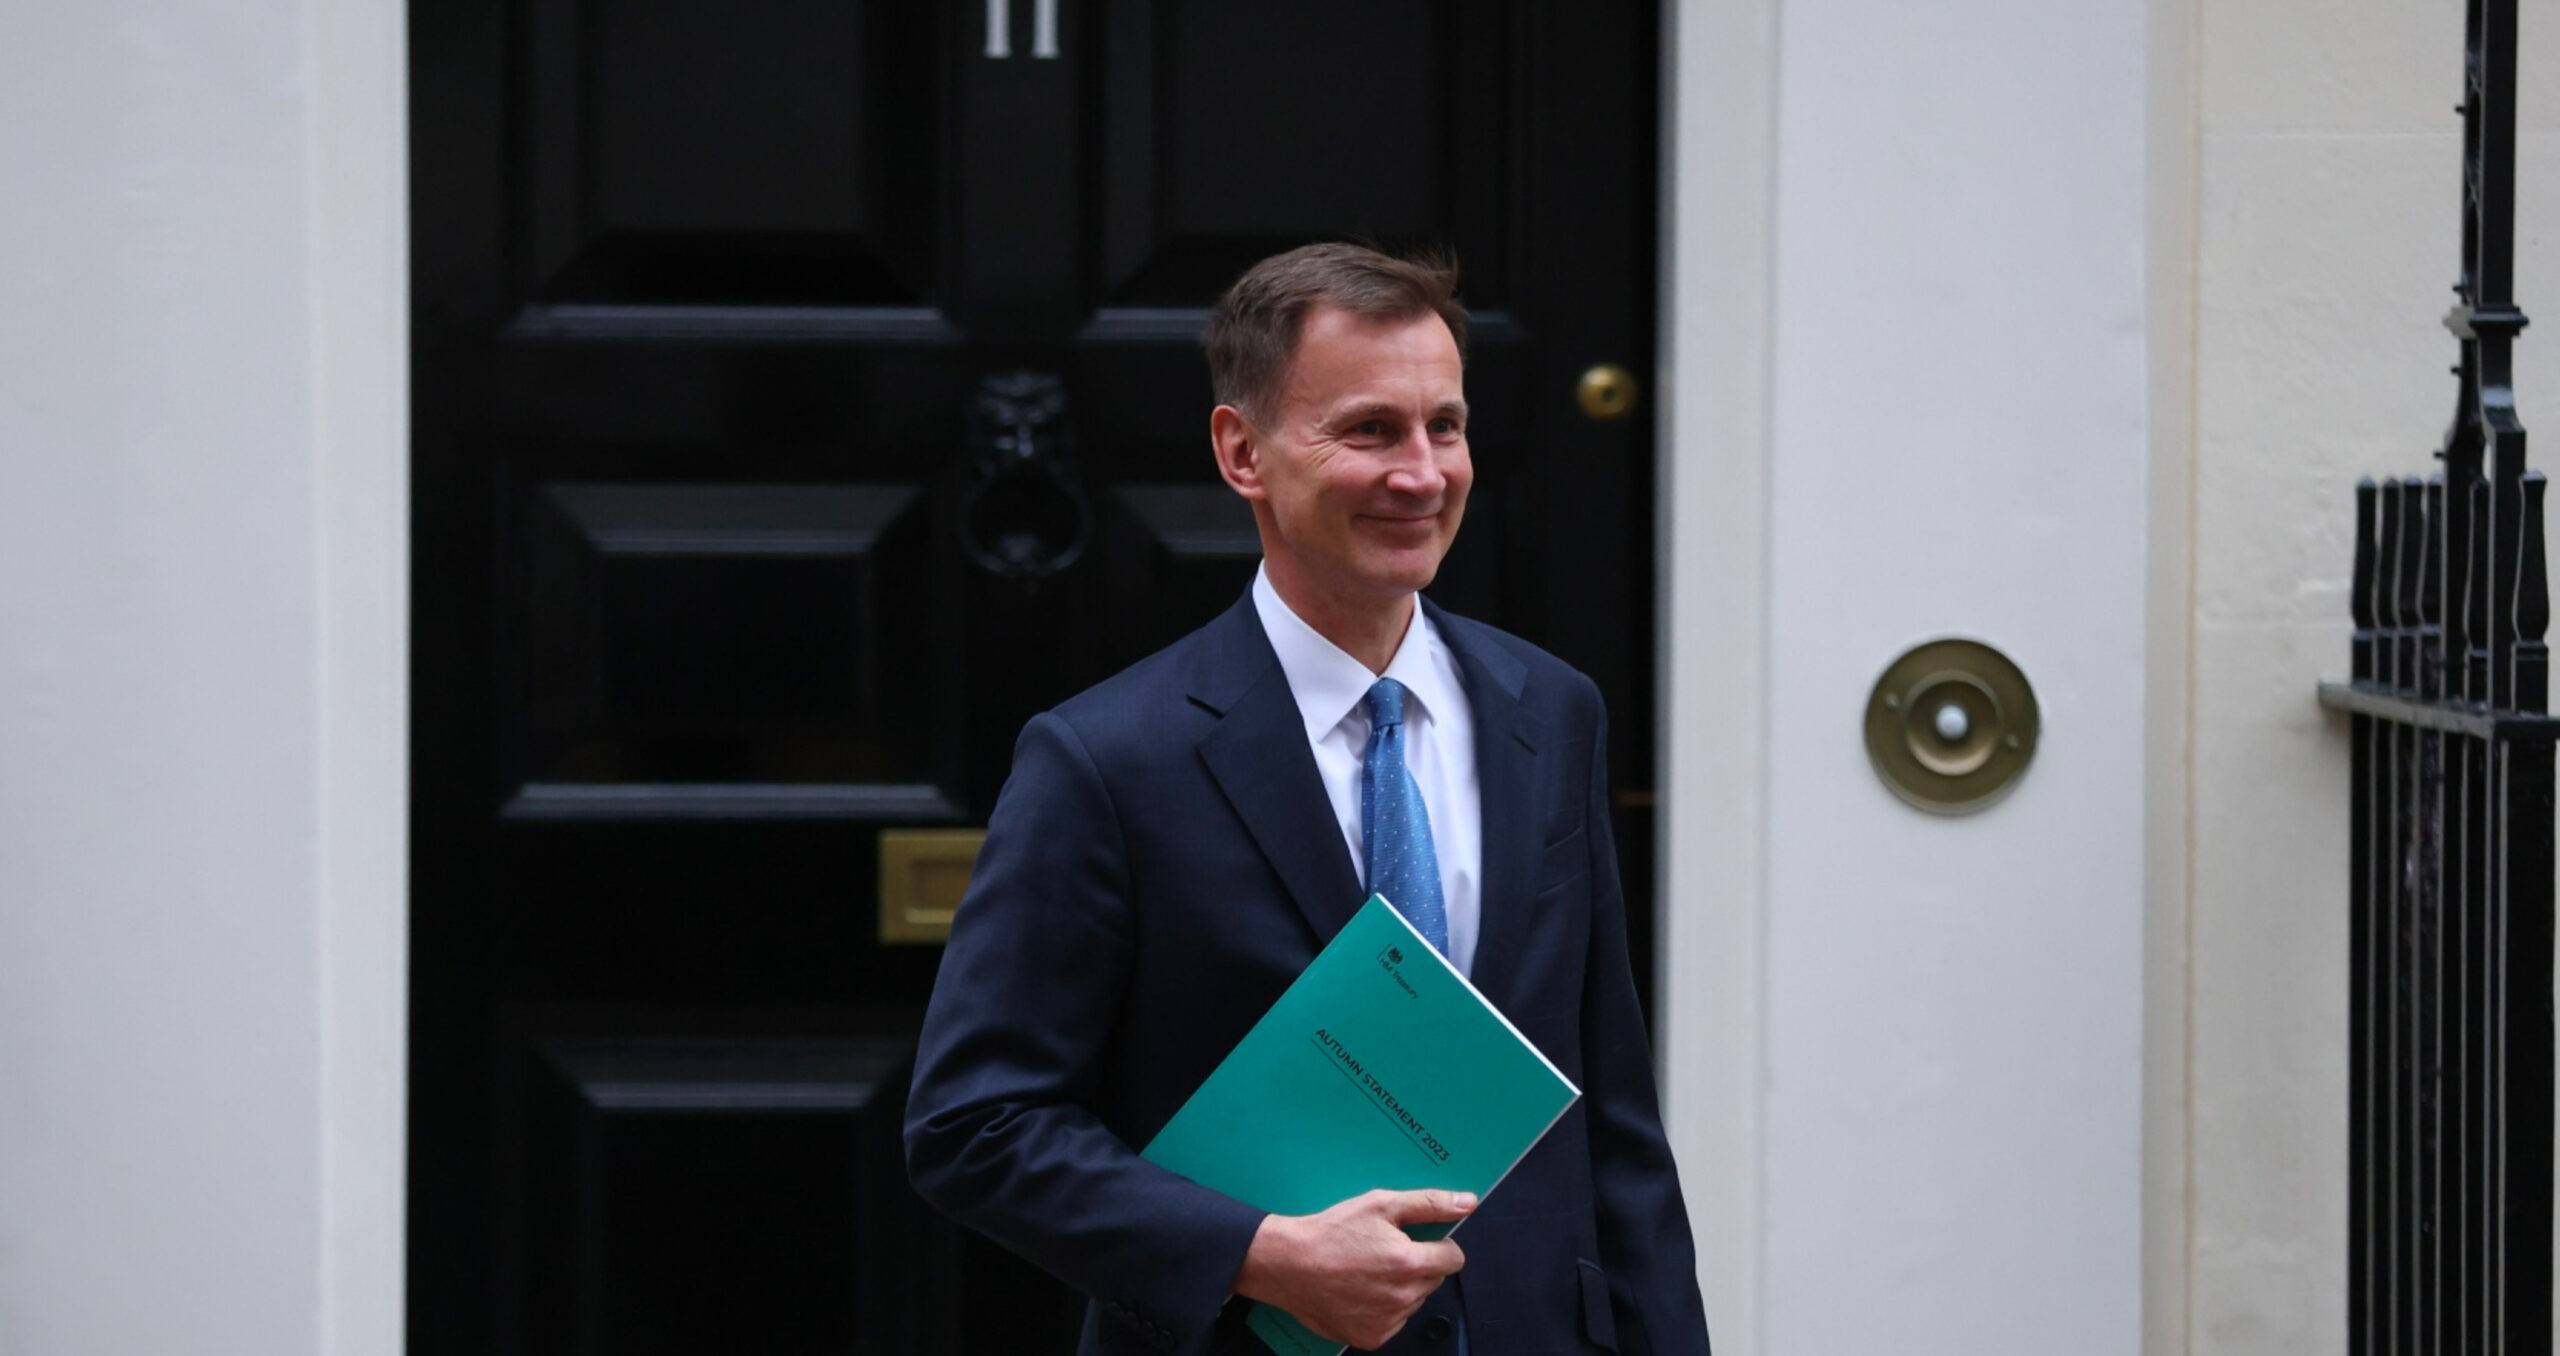 UK chancellor Jeremy Hunt departs 11 Downing Street, ahead of presenting the Autumn Statement. The government has pledged £960mn to support investment in carbon capture utilisation and storage, offshore wind, hydrogen, electricity networks, and nuclear energy. (Photo: Hollie Adams/Bloomberg) 